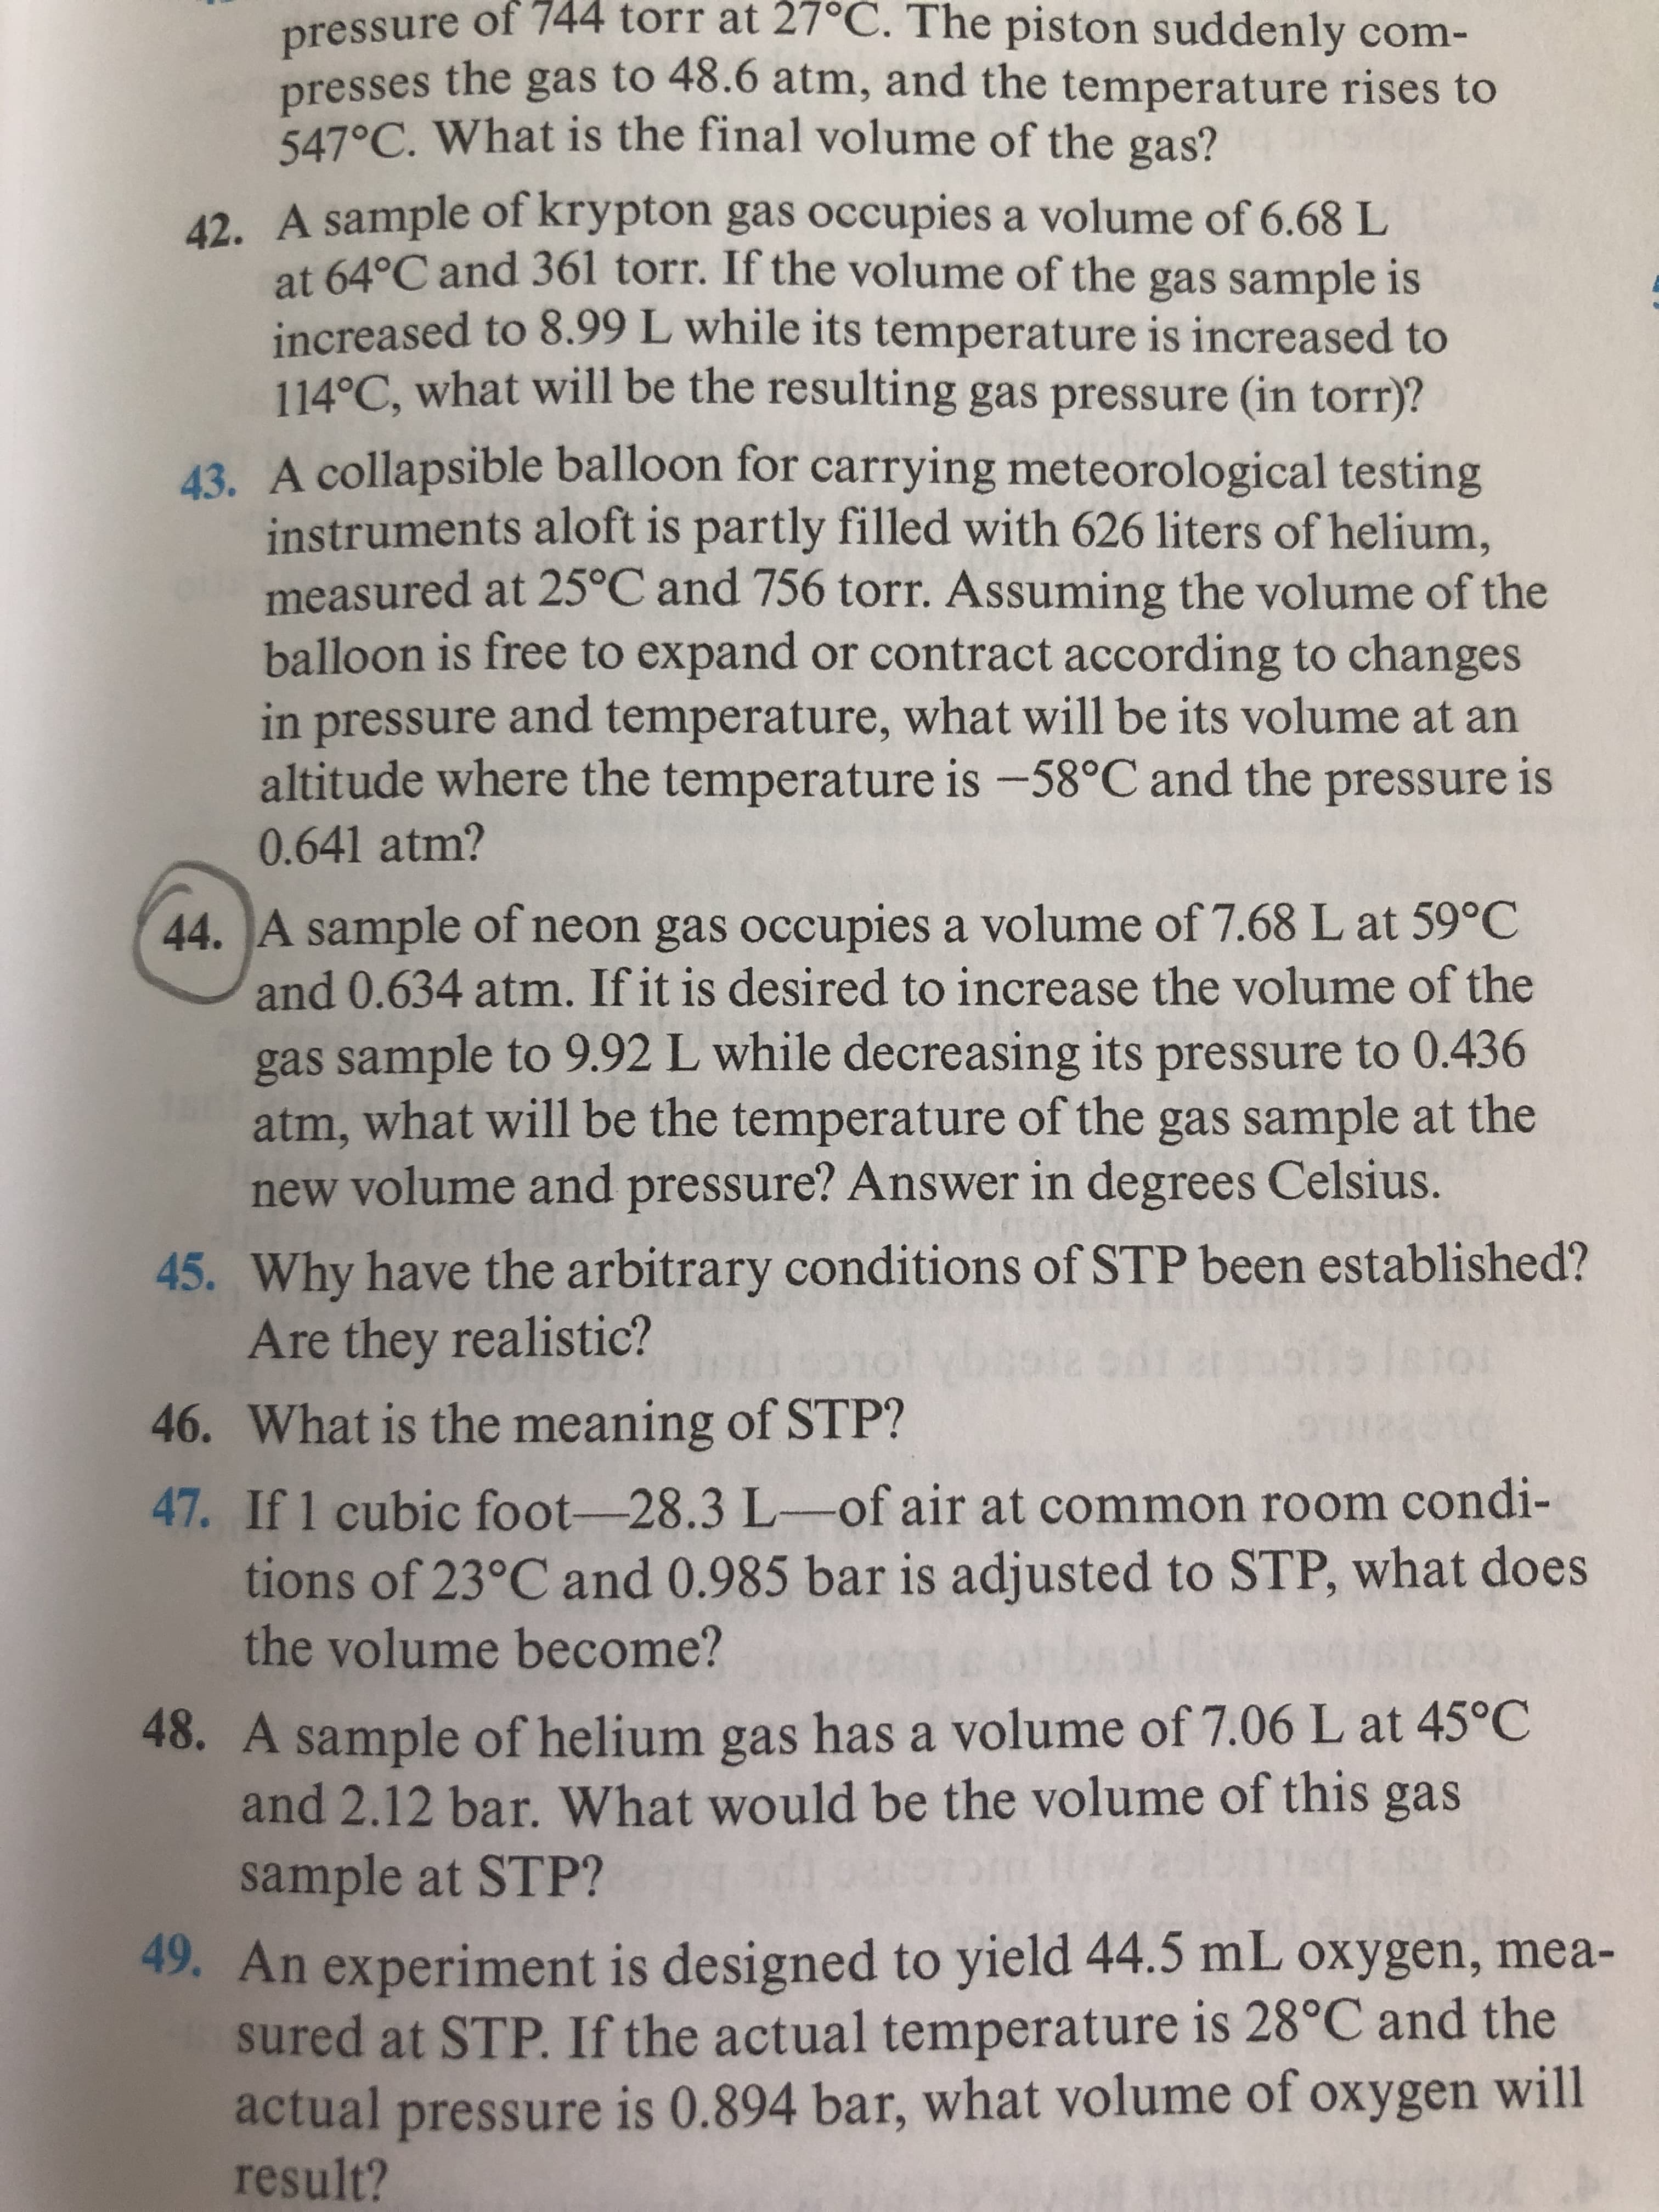 pressure of 744 torr at 27°C. The piston suddenly com-
presses the gas to 48.6 atm, and the temperature rises to
547°C. What is the final volume of the gas?
42. A sample of krypton gas occupies a volume of 6.68 L
at 64°C and 361 torr. If the volume of the gas sample is
increased to 8.99 L while its temperature is increased to
114°C, what will be the resulting gas pressure (in torr)?
43. A collapsible balloon for carrying meteorological testing
instruments aloft is partly filled with 626 liters of helium,
measured at 25°C and 756 torr. Assuming the volume of the
balloon is free to expand or contract according to changes
in pressure and temperature, what will be its volume at an
altitude where the temperature is -58°C and the pressure is
0.641 atm?
44. A sample of neon gas occupies a volume of 7.68 L at 59°C
and 0.634 atm. If it is desired to increase the volume of the
gas sample to 9.92 L while decreasing its pressure to 0.436
atm, what will be the temperature of the gas sample at the
new volume and pressure? Answer in degrees Celsius.
45. Why have the arbitrary conditions of STP been established?
Are they realistic?
46. What is the meaning of STP?
47. If 1 cubic foot-28.3L-of air at common room condi-
tions of 23°C and 0.985 bar is adjusted to STP, what does
the volume become?
48. A sample of helium gas has a volume of 7.06 L at 45°C
and 2.12 bar. What would be the volume of this gas
sample at STP?
49. An experiment is designed to yield 44.5 mL oxygen, mea-
sured at STP. If the actual temperature is 28°C and the
actual pressure is 0.894 bar, what volume of oxygen will
result?
